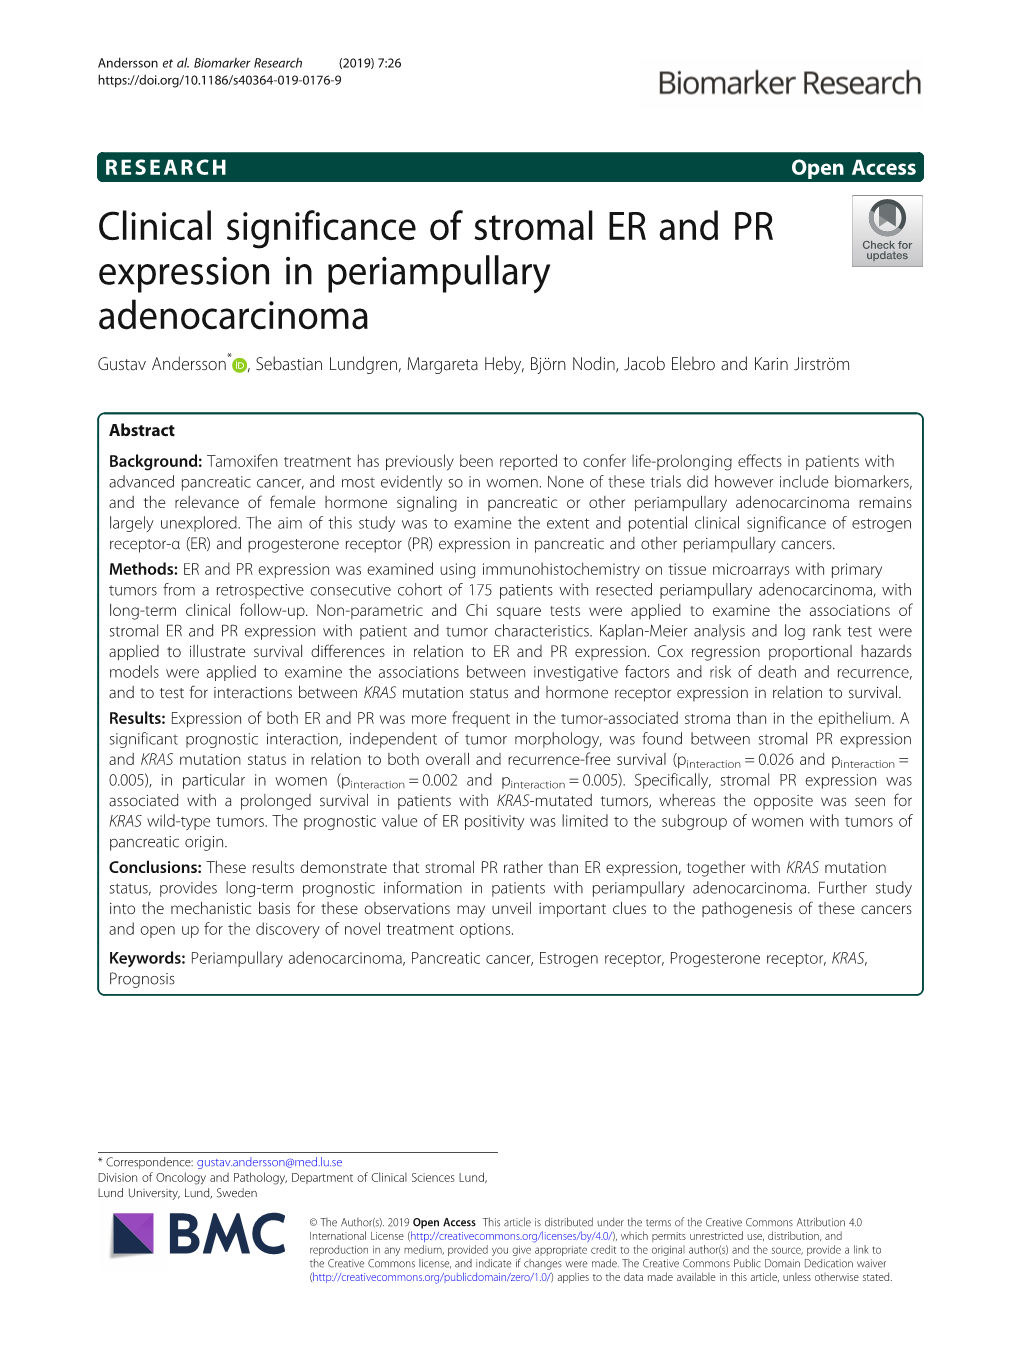 Clinical Significance of Stromal ER and PR Expression in Periampullary Adenocarcinoma